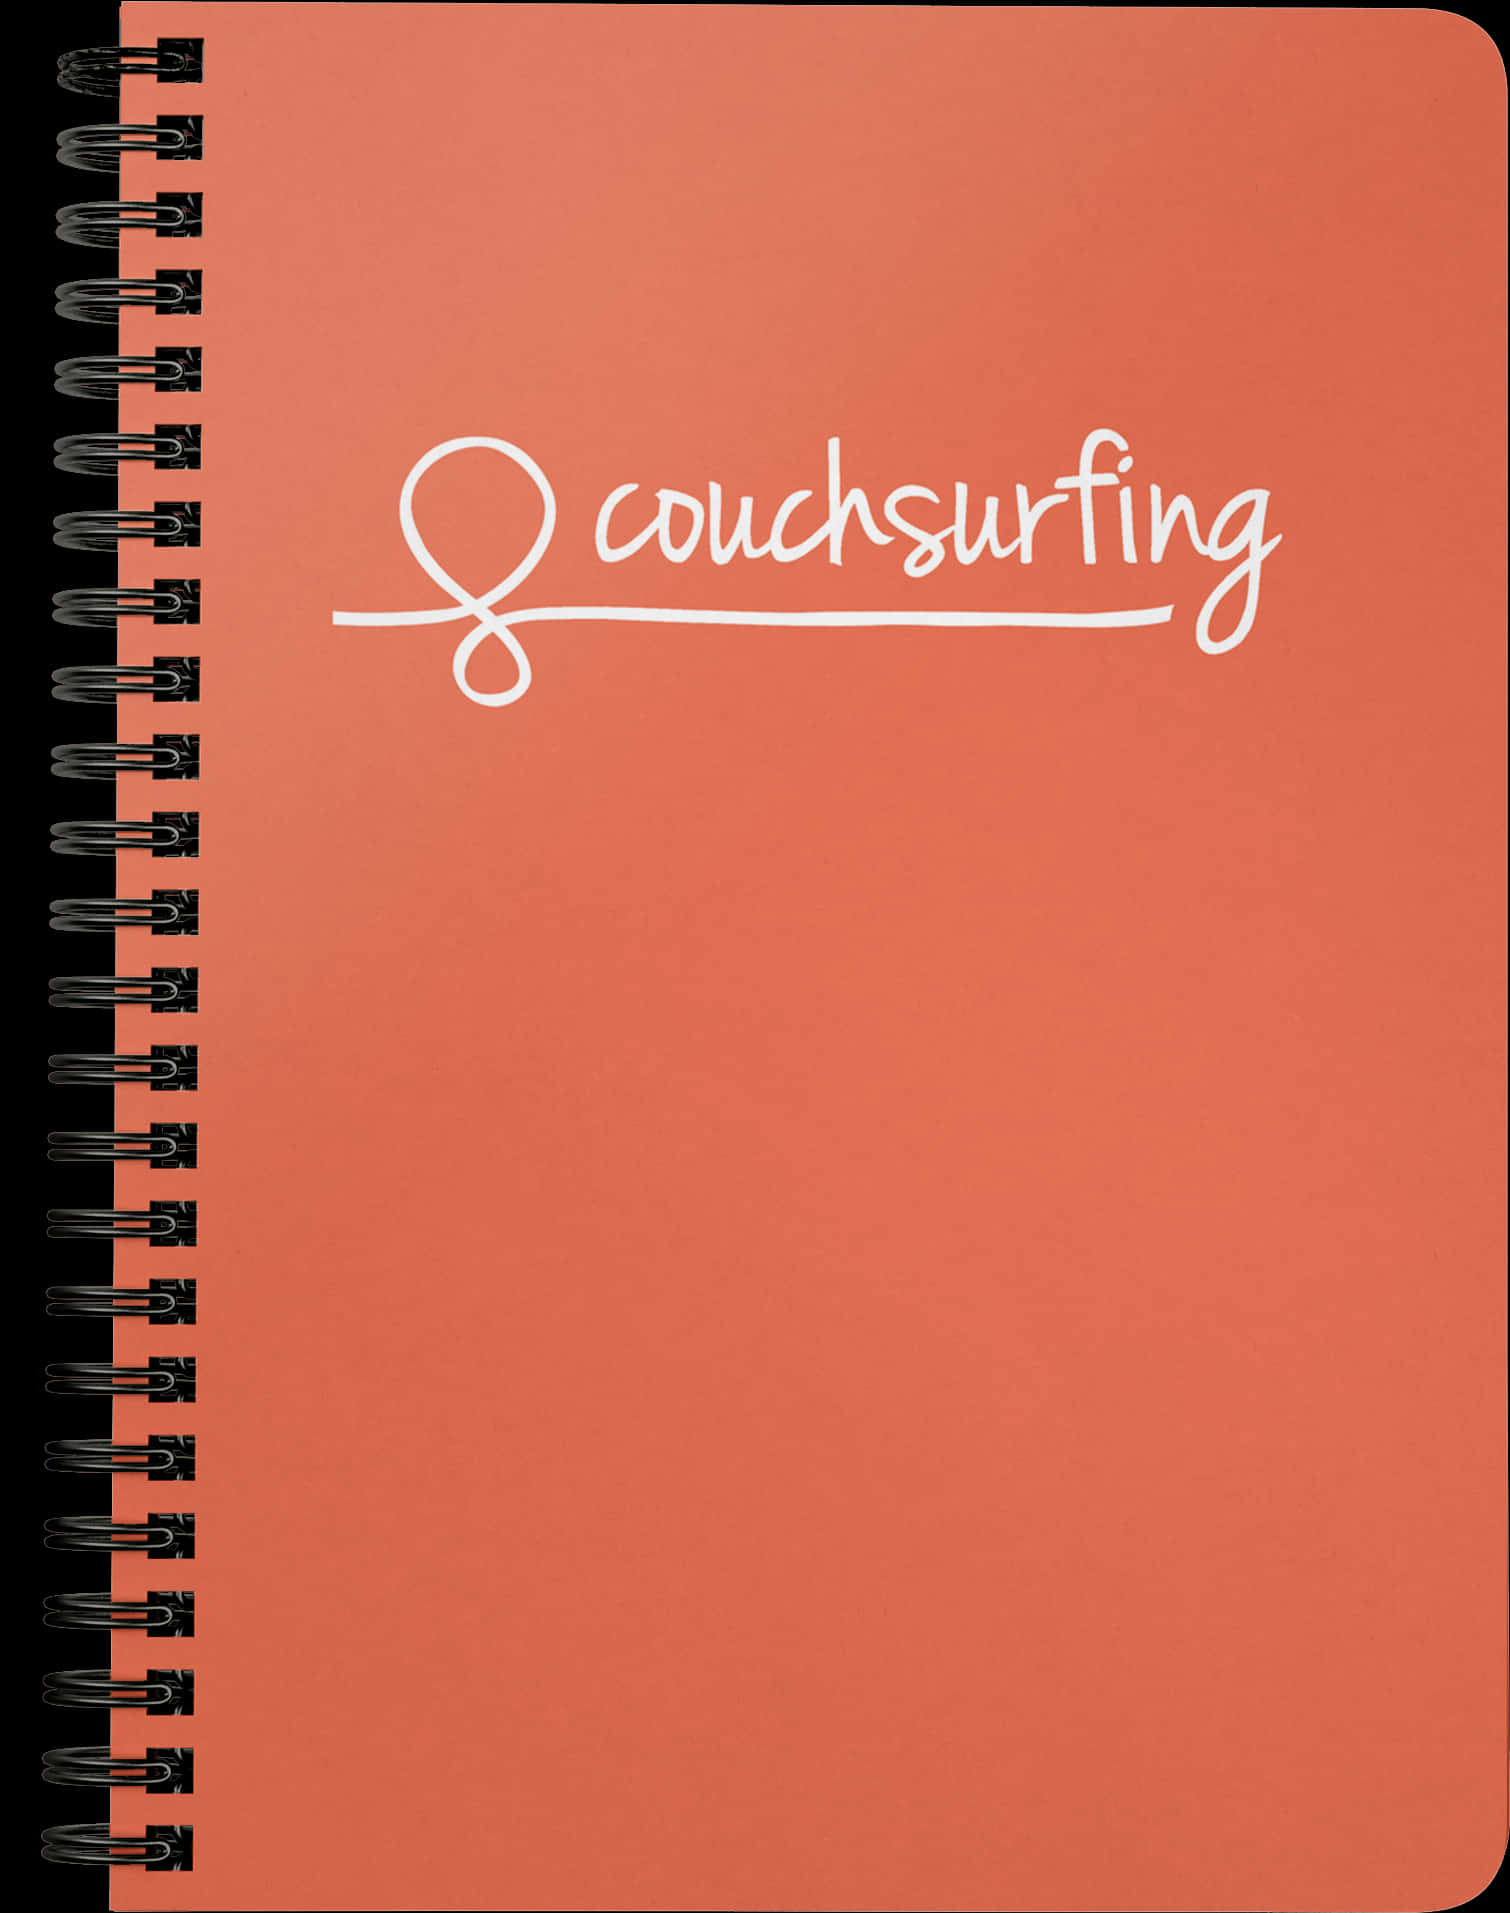 Couchsurfing Branded Notebook PNG